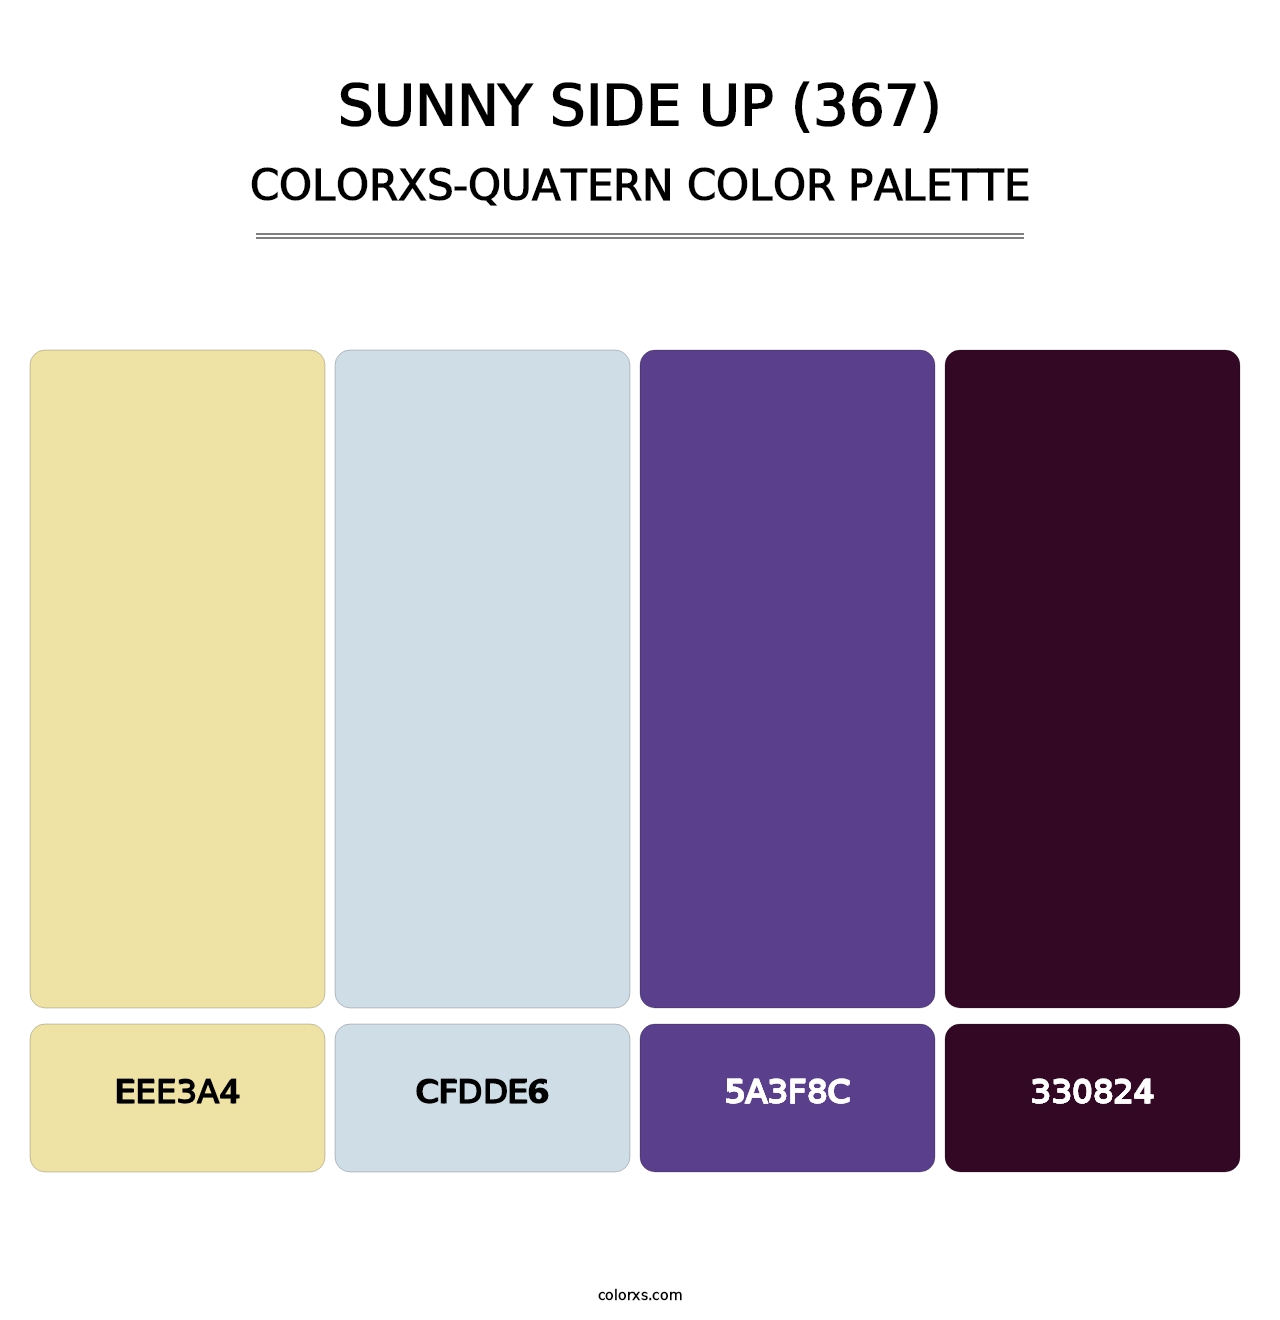 Sunny Side Up (367) - Colorxs Quatern Palette